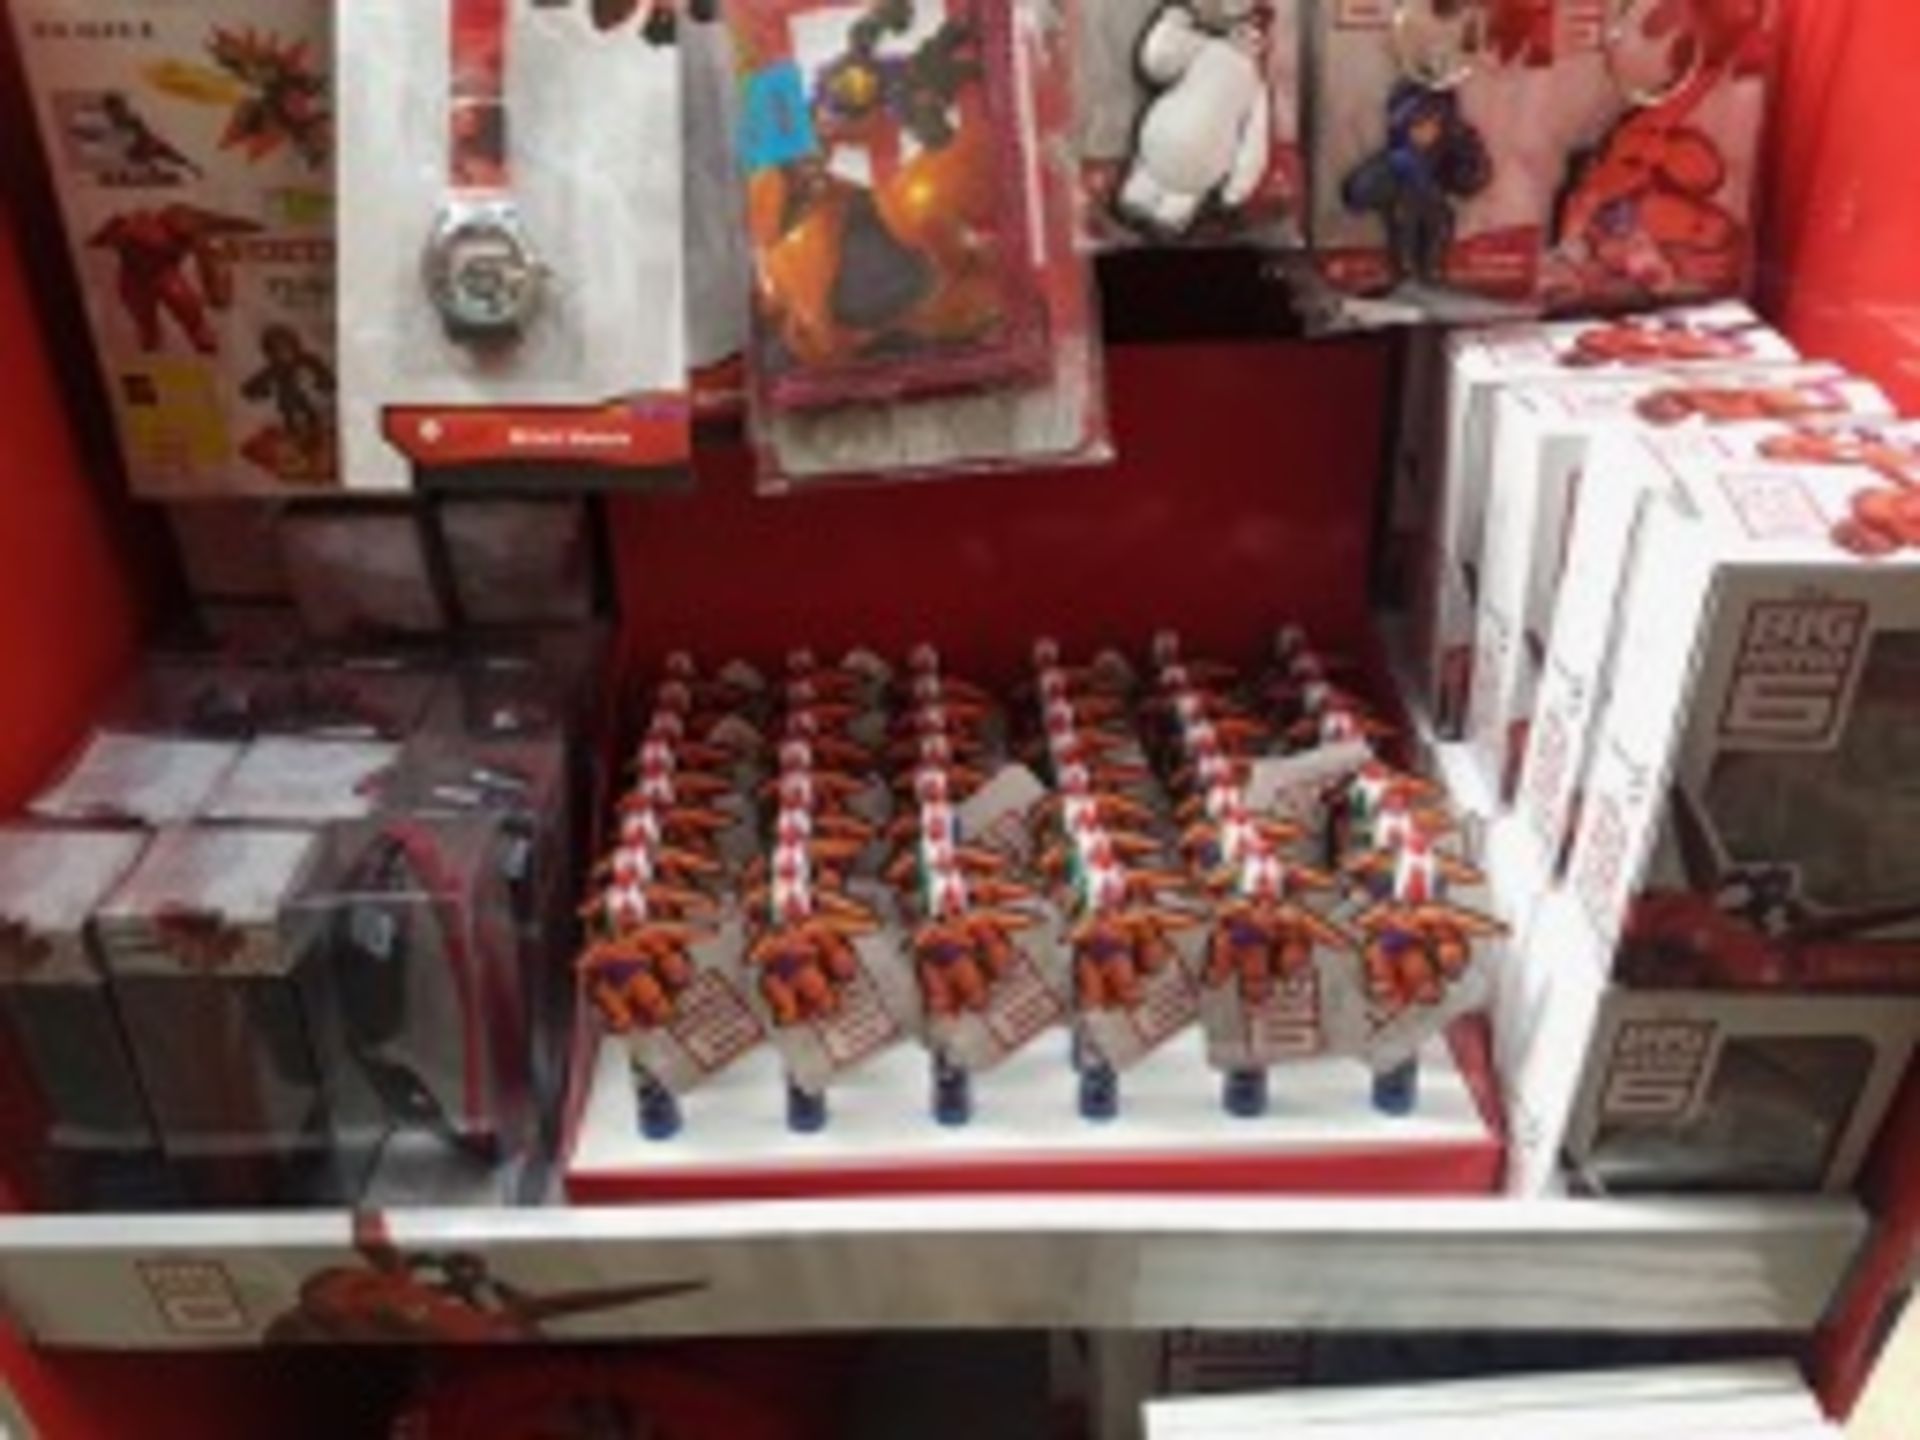 1 x Brand New Big Hero 6 - 328 piece Full Shop Display Unit. Contains: 36 Sticker Sets, 16 - Image 7 of 7